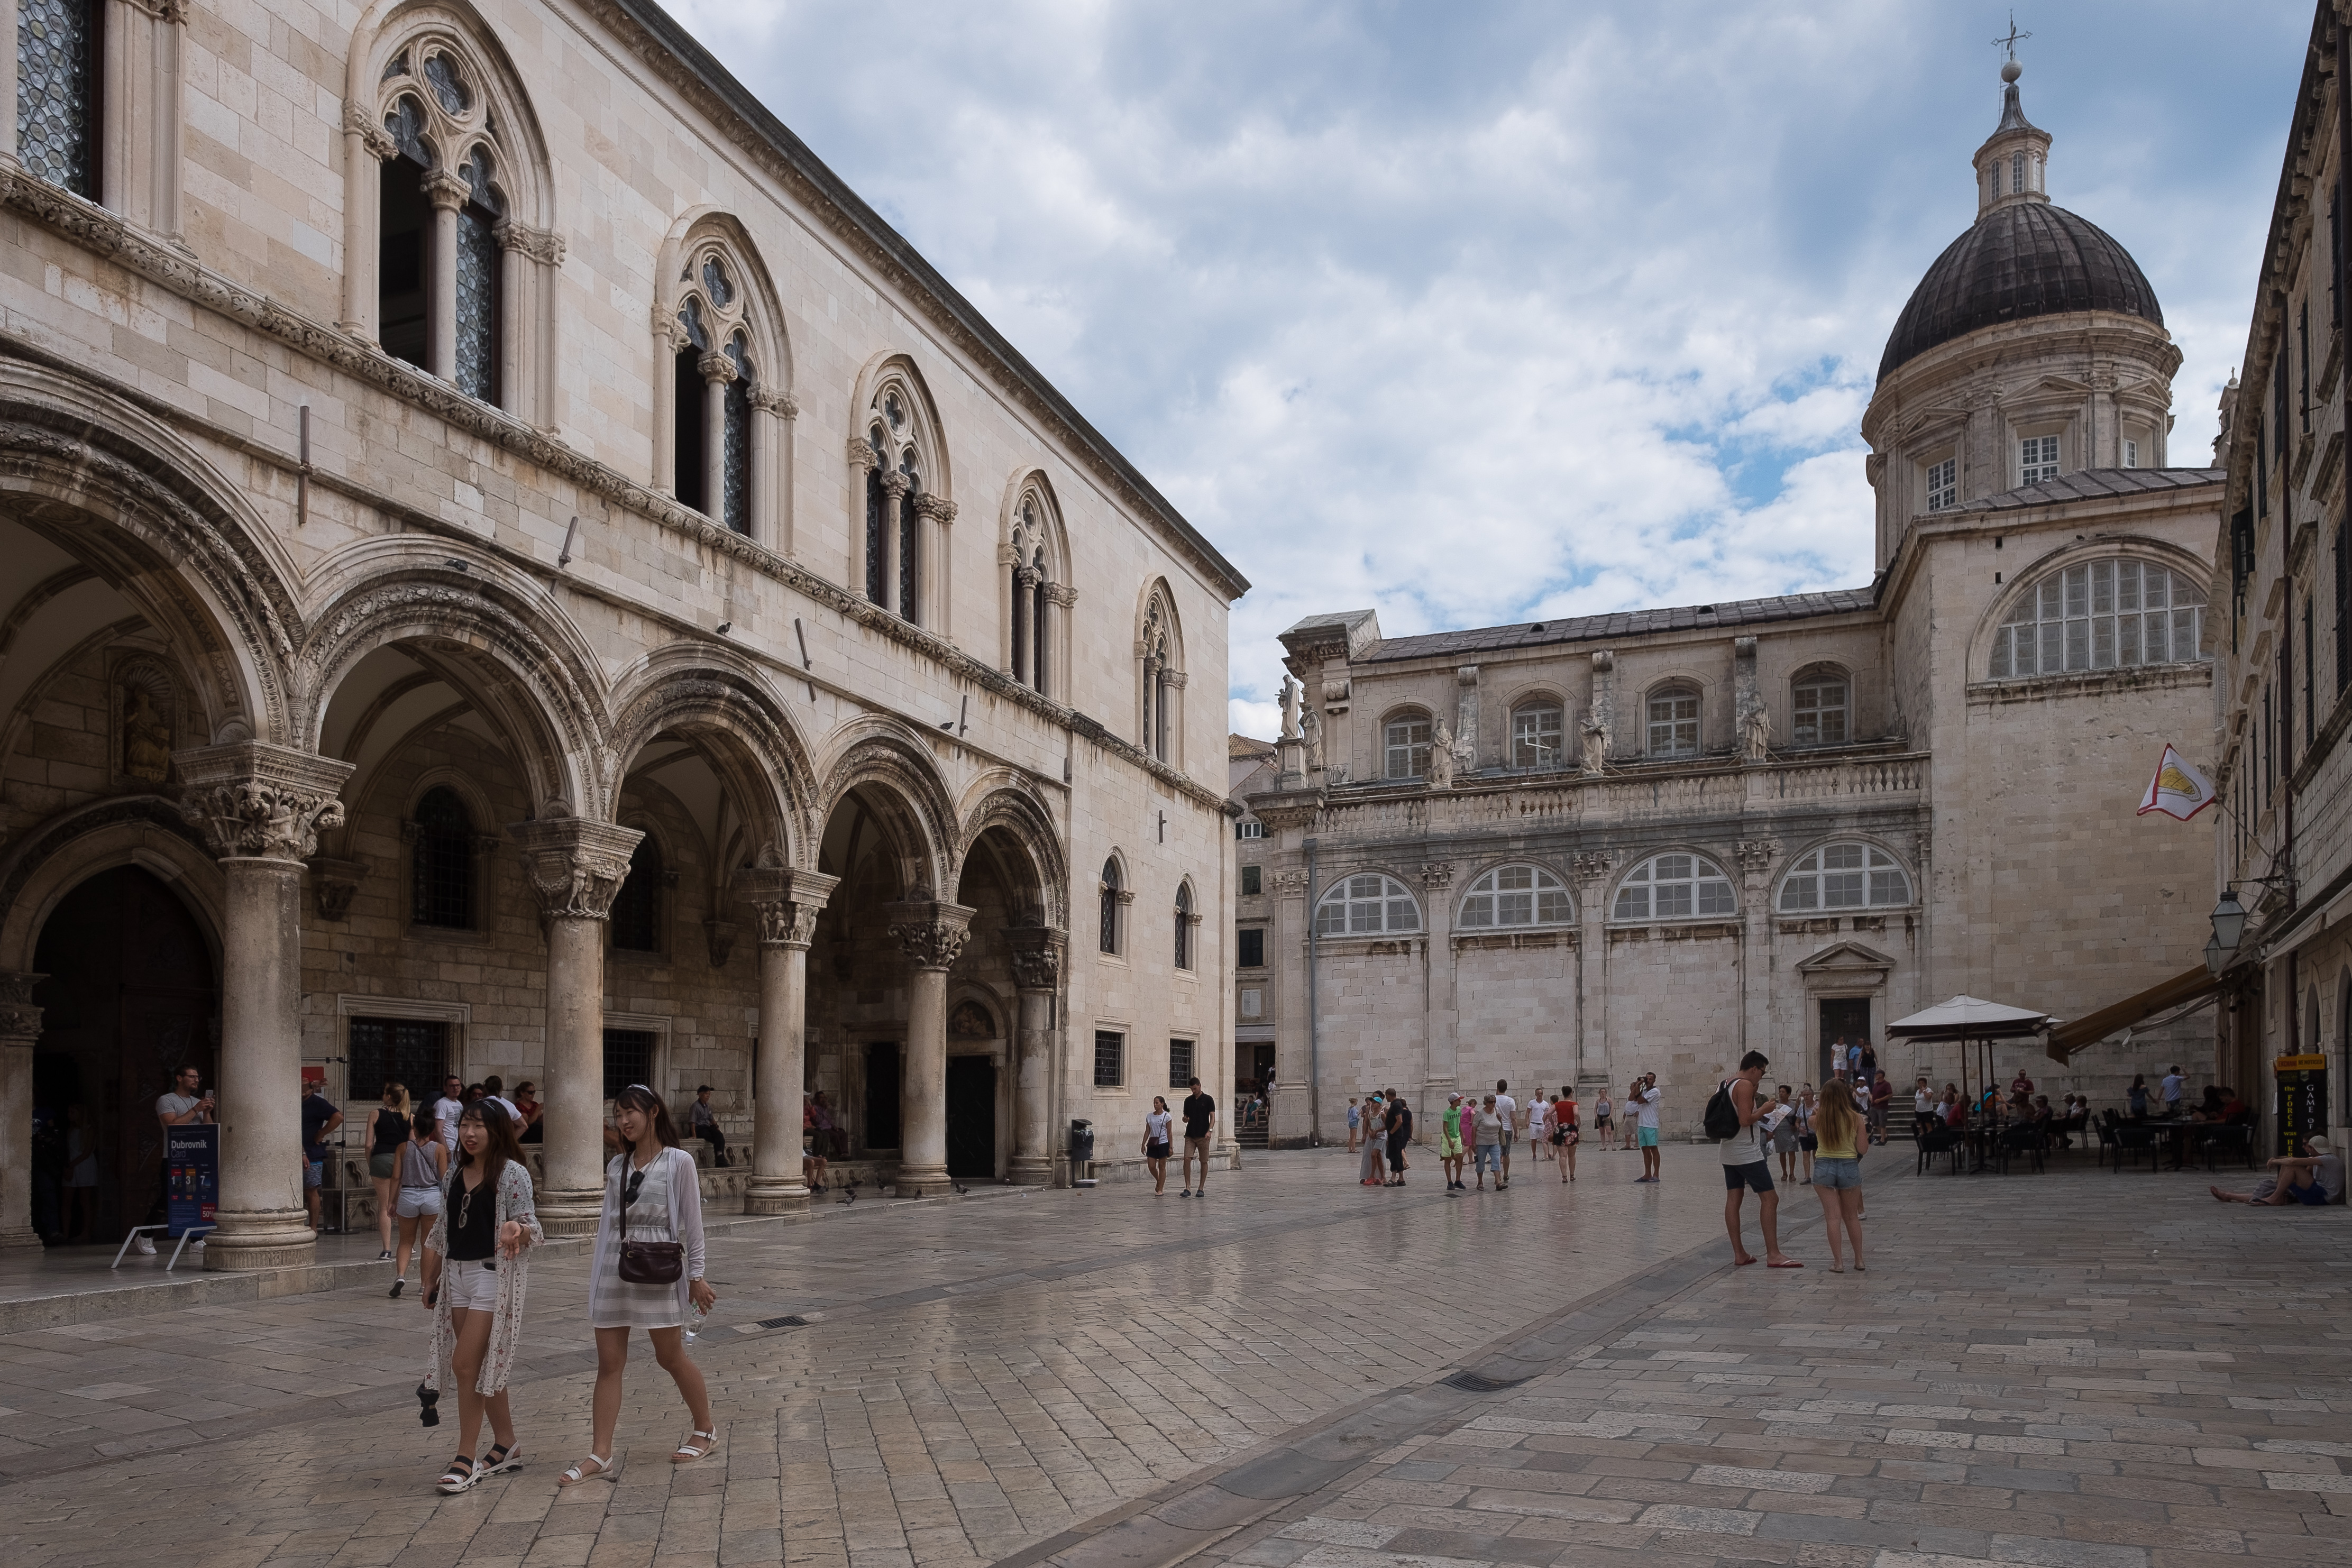 The Rector’s Palace and the Cathedral, Dubrovnik